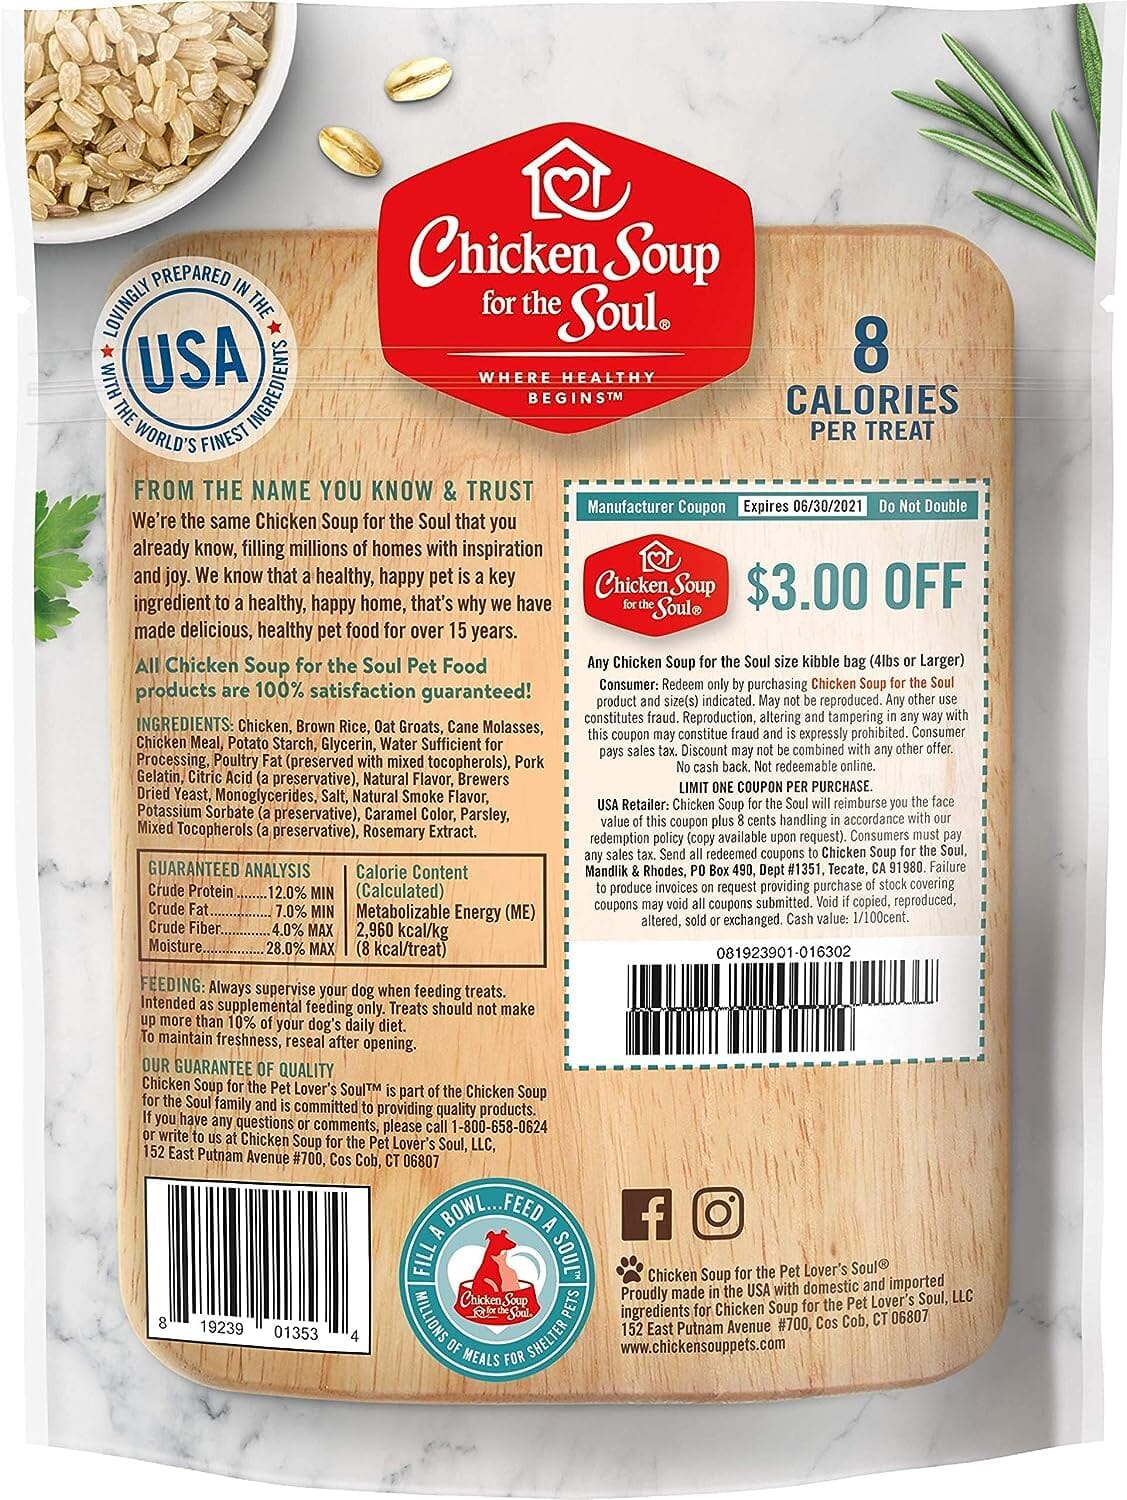 Chicken Soup for the Soul Savory Snacks Lamb Soft and Chewy Dog Treats - 6 Oz - 6 Pack  